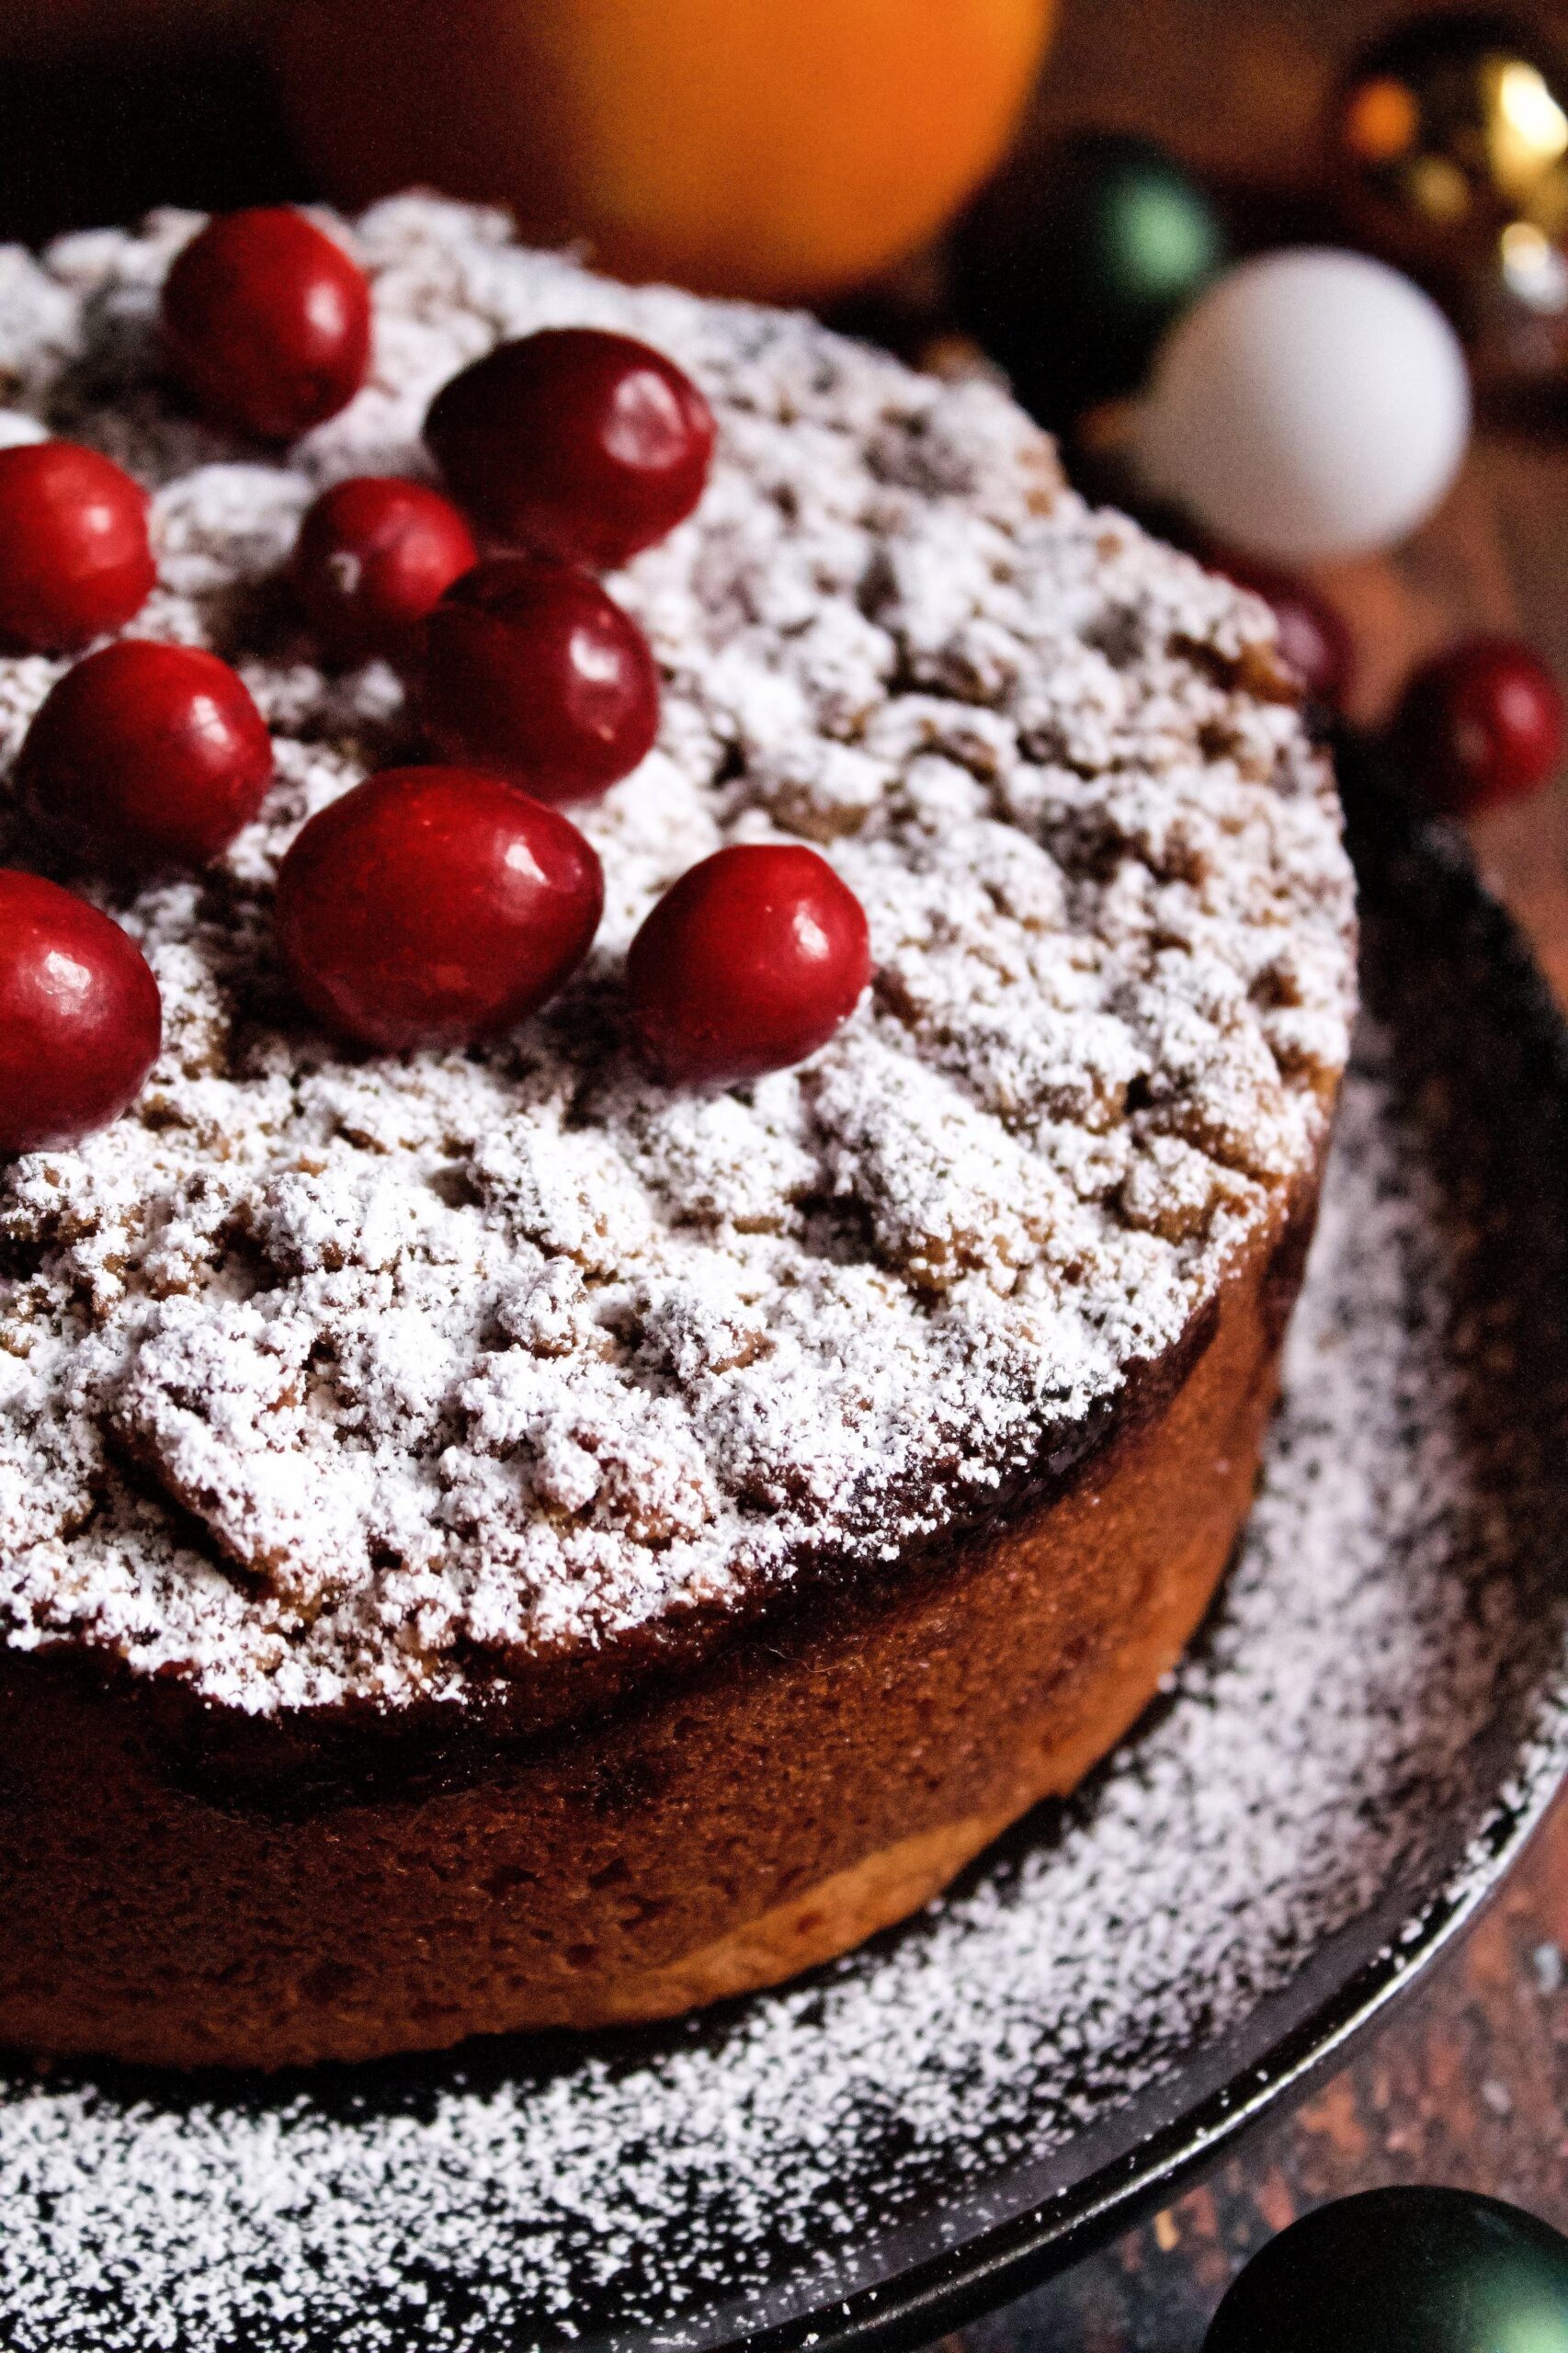  Enjoy a slice of this cake with a steaming cup of hot coffee for a satisfying breakfast